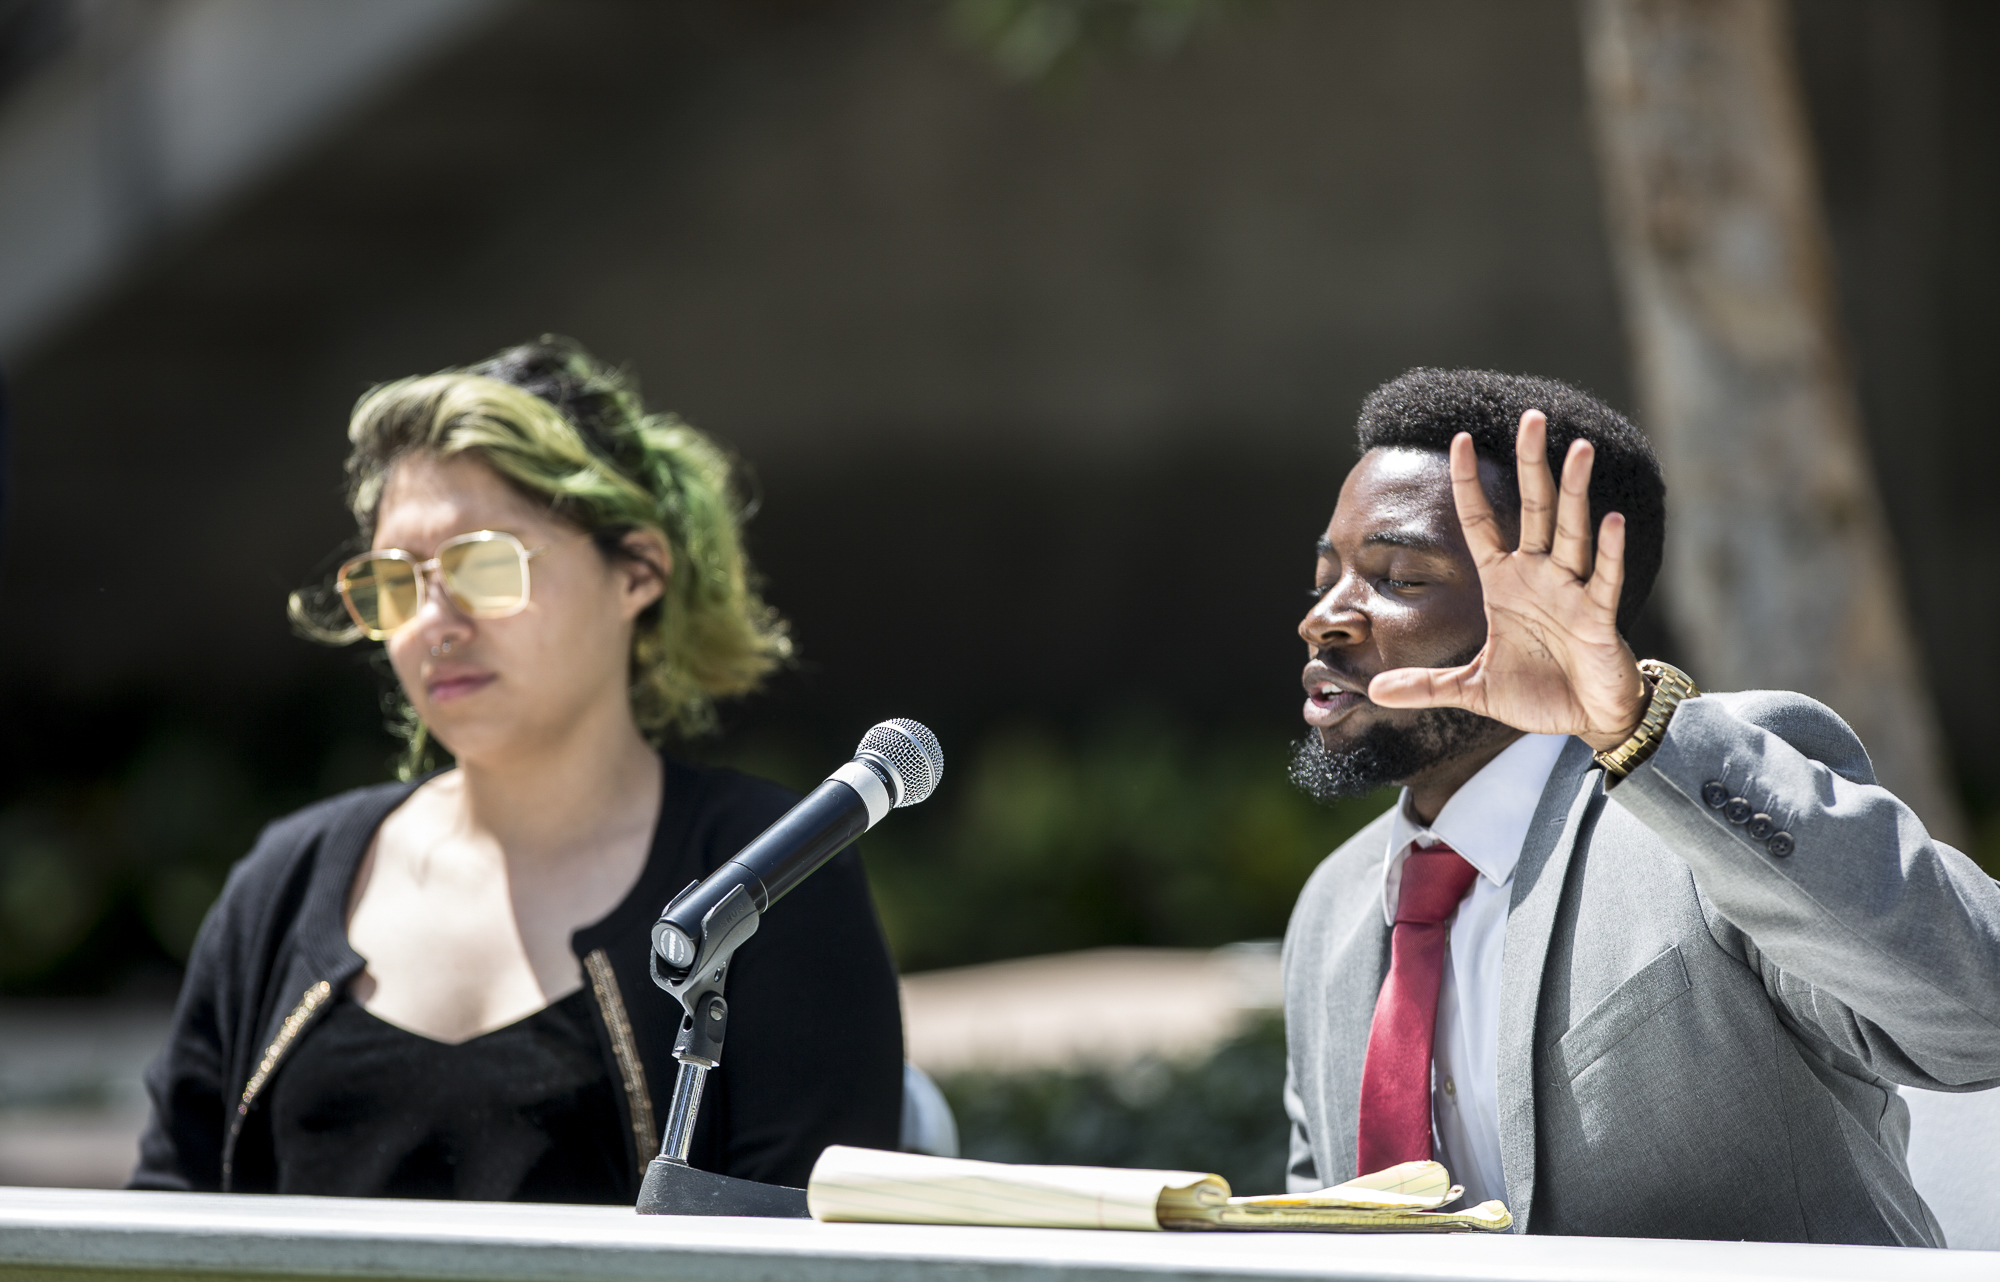  Santa Monica College Associate Student (A.S) Director of Student Advocacy candidates Alexa Benavente (left) and Gosple Ofoegbu (right) take questions from those in attendance during the A.S election debate on the quad of the Santa Monica College mai